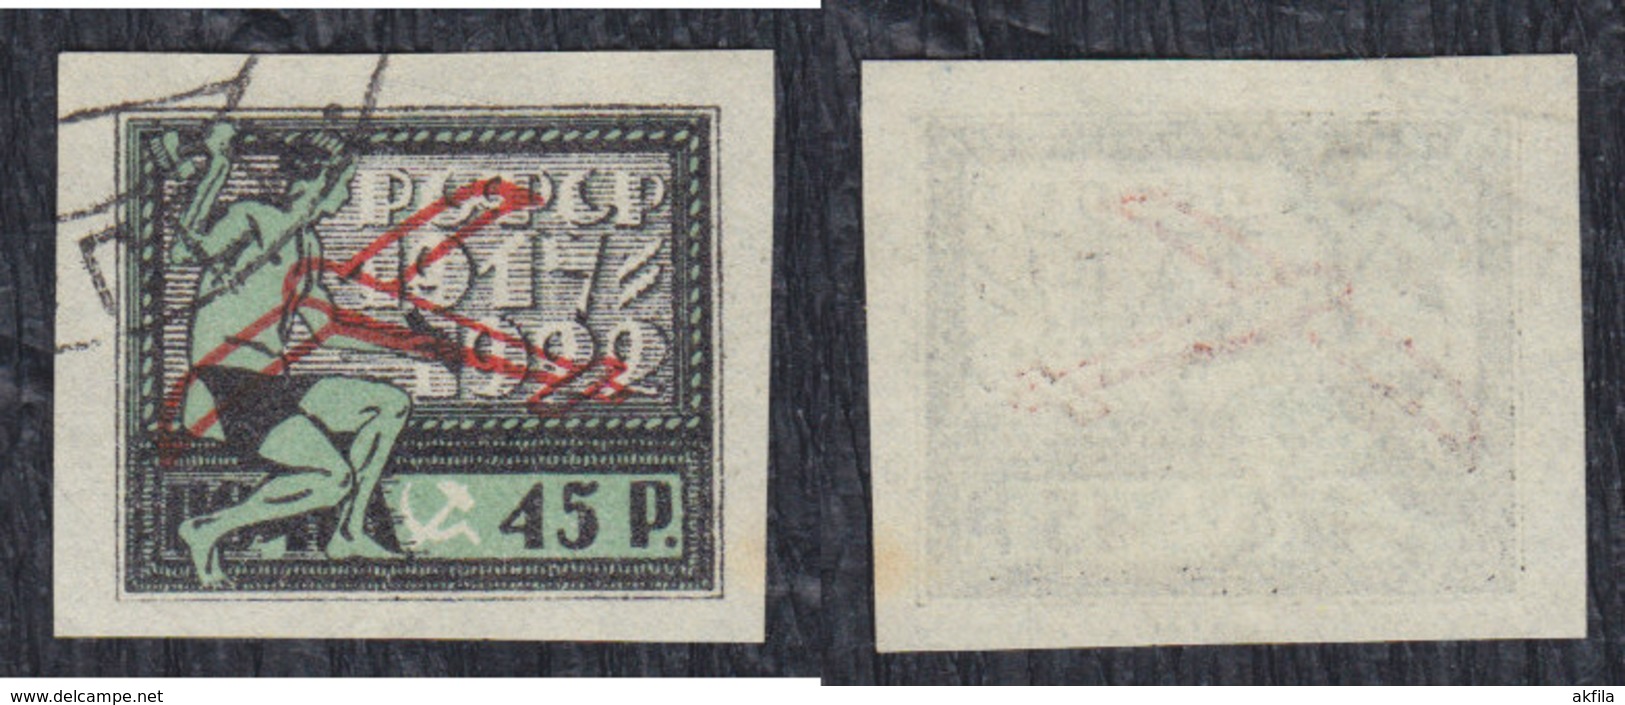 Russia 1922 Airmail Stamp - Value 45 R With Overprint, Used (o) Michel 196 - Usados